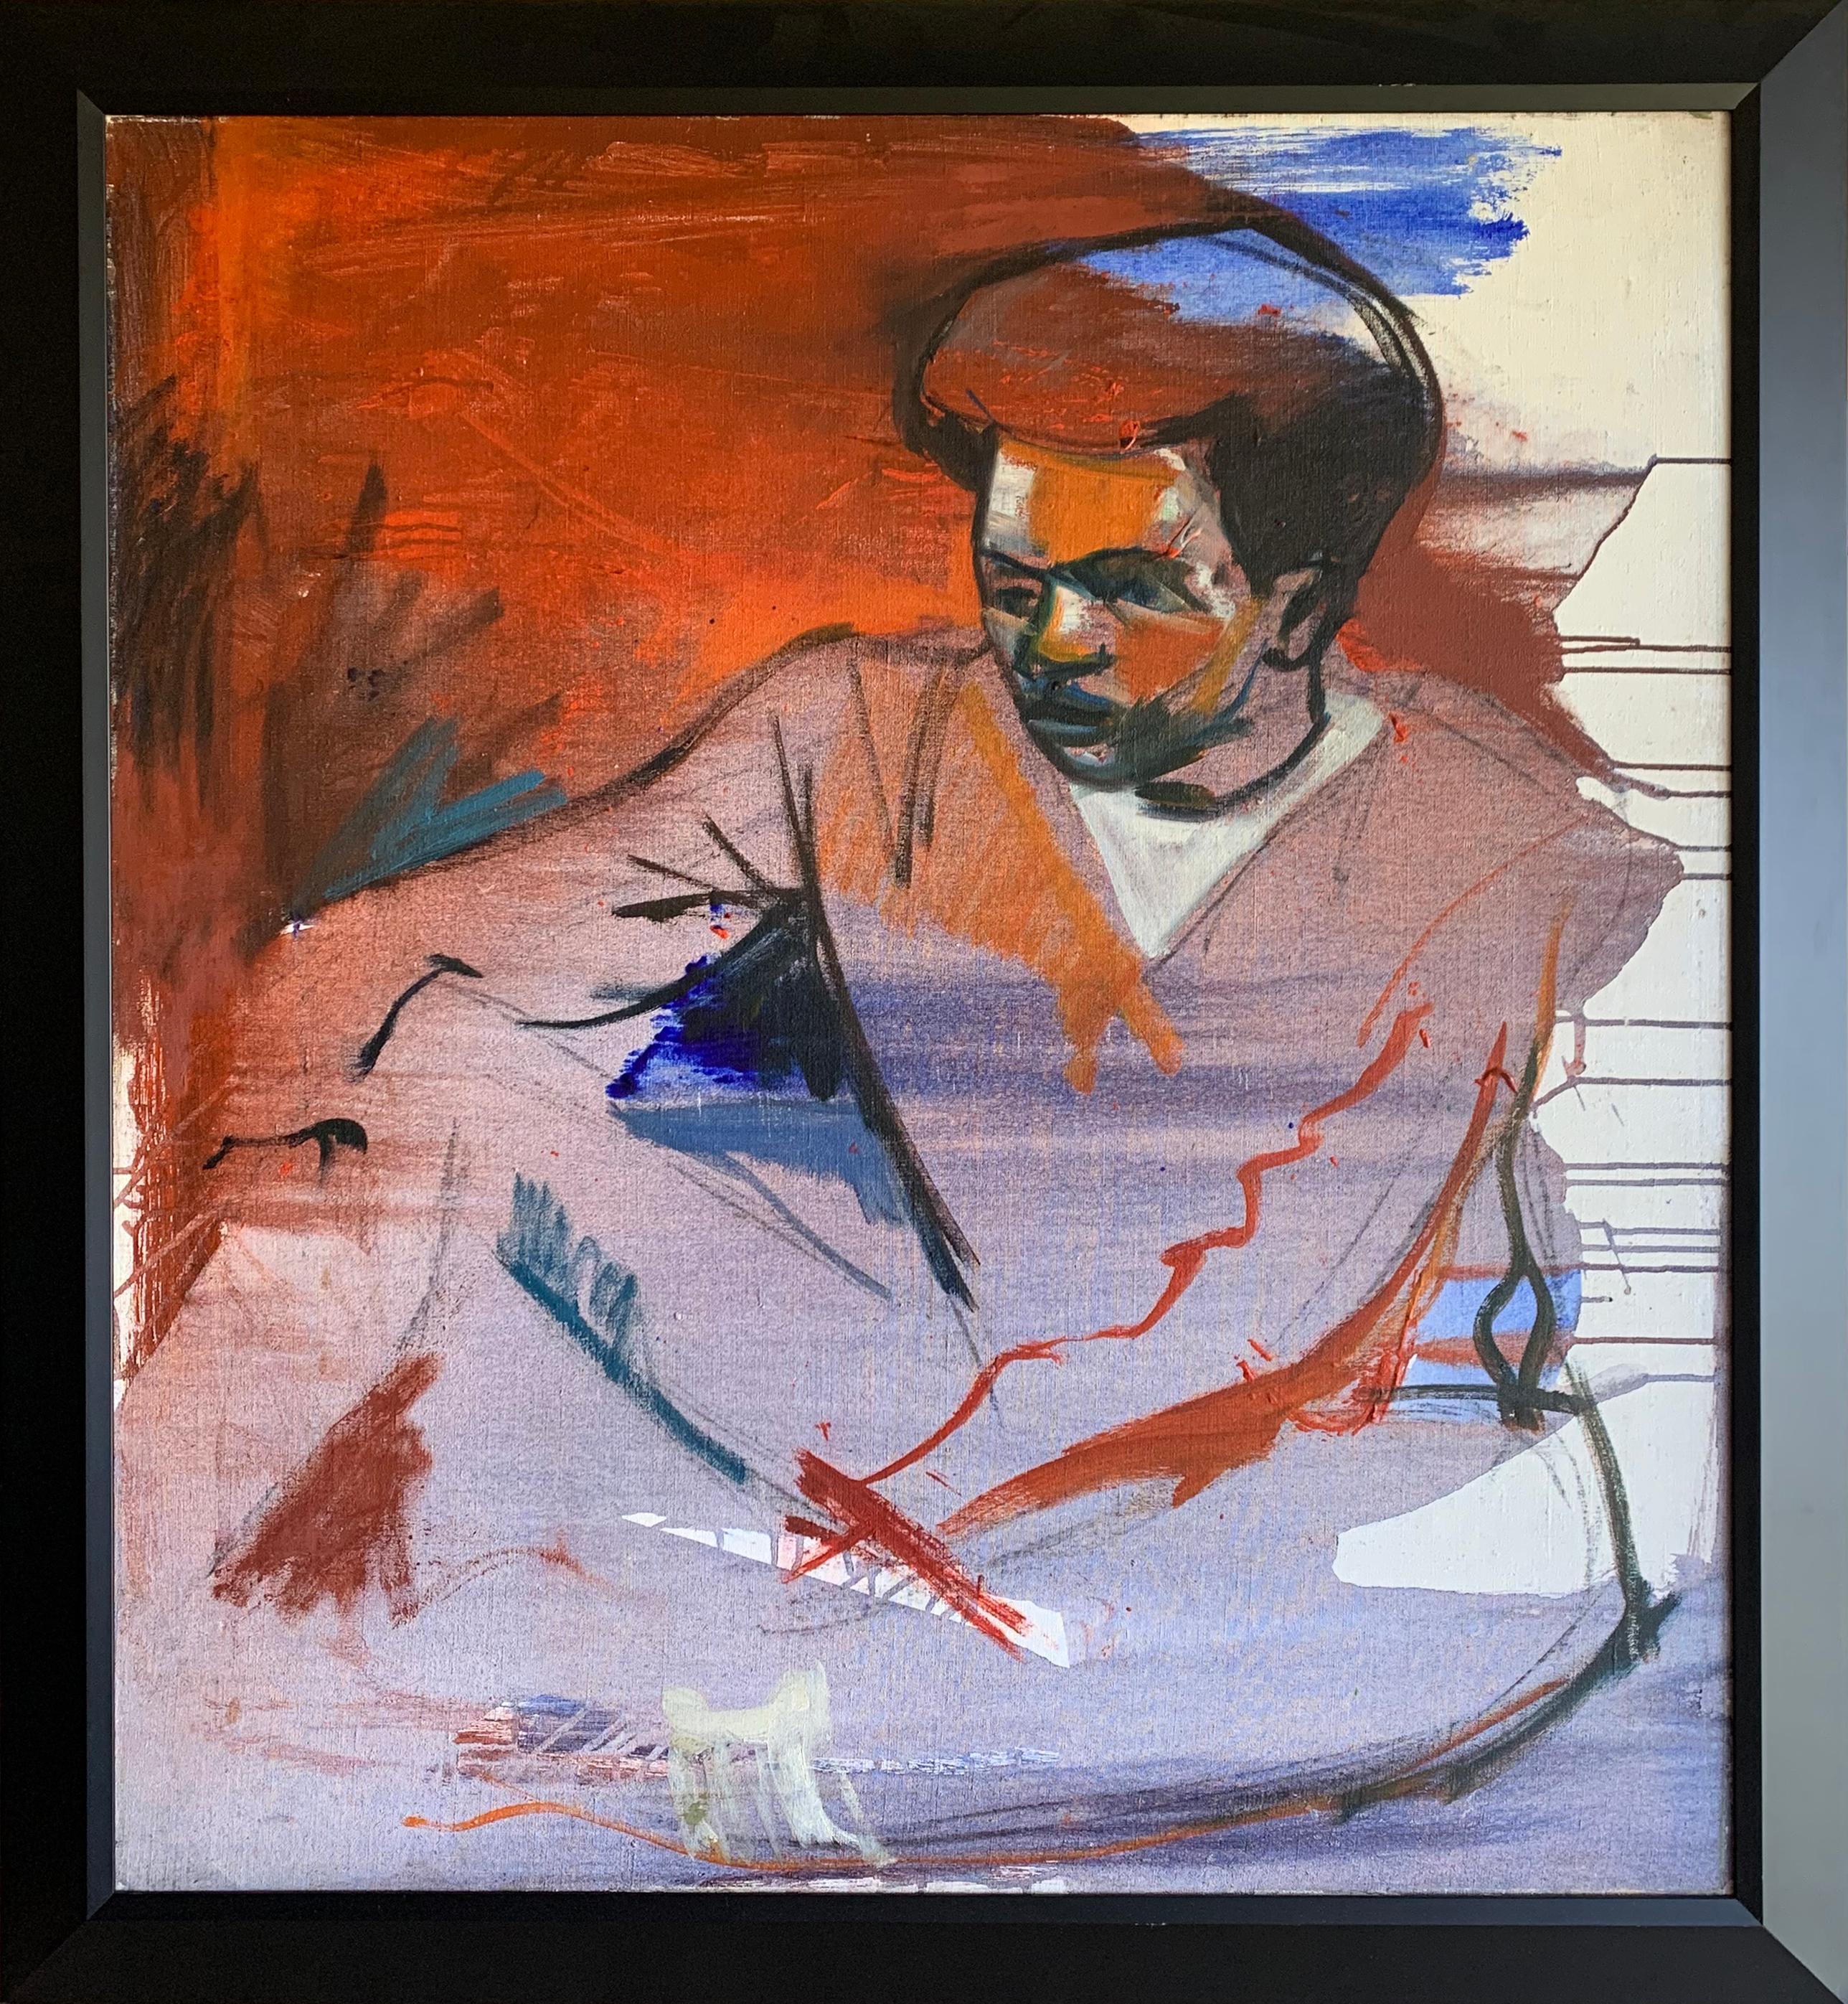 Modern Man, Expressionist Portrait in Red, White, and Blue - Painting by Bernard Harmon